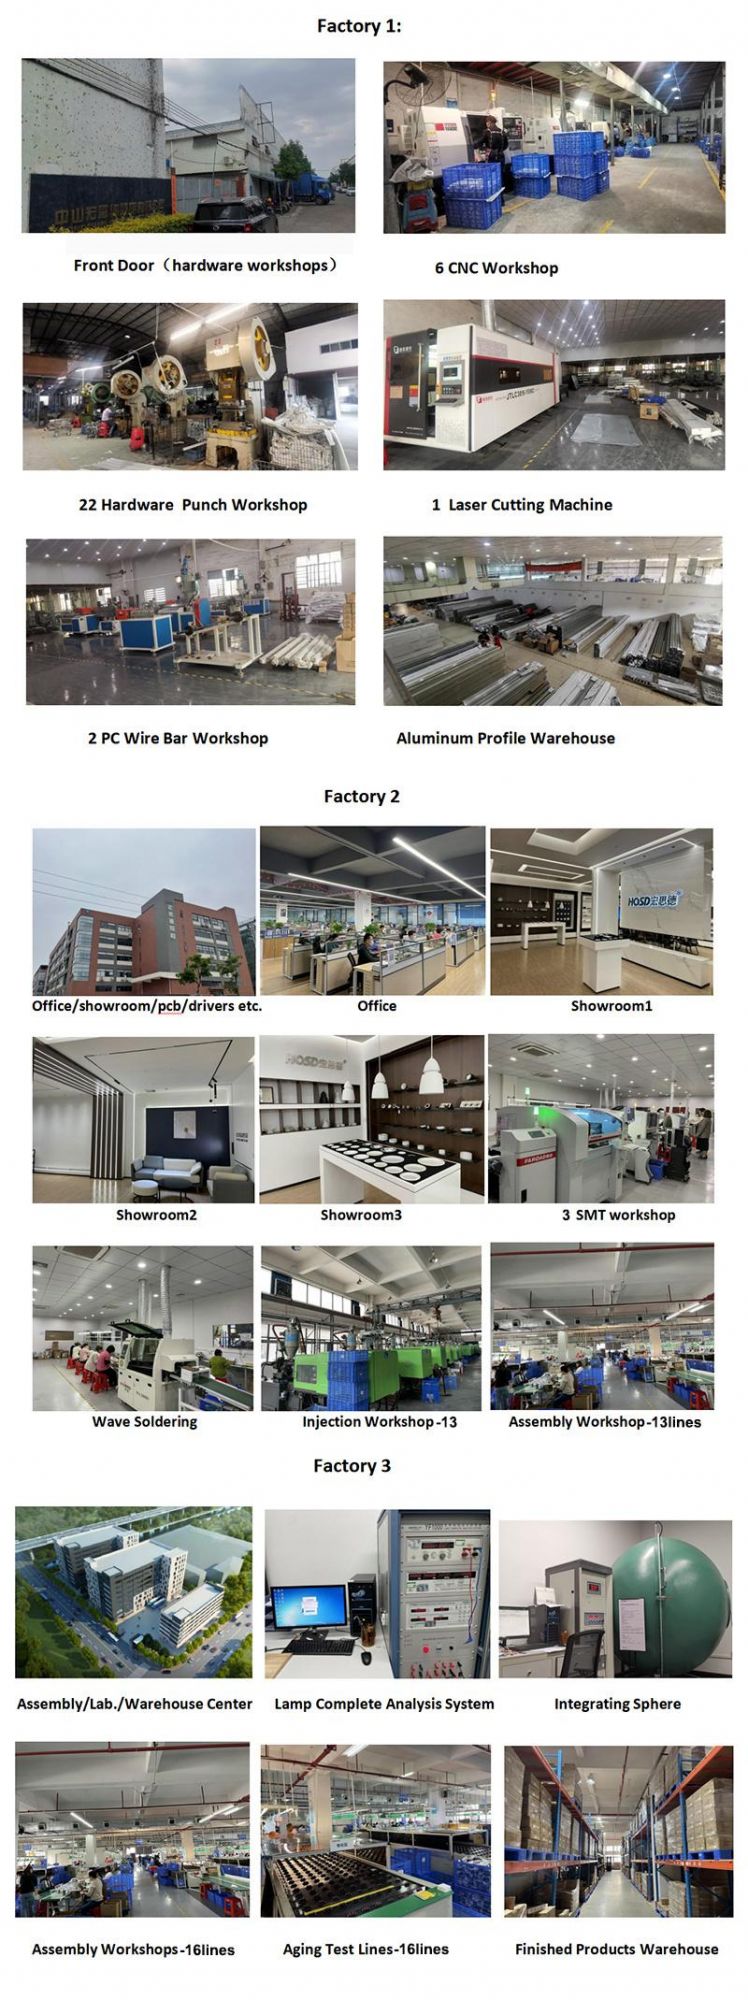 25W 3wire Ra>97 Dimmabl Wallwasher LED LED Track Light for Commercial Clothes Chain Store Shops Shopping Mall Exhibition Reception